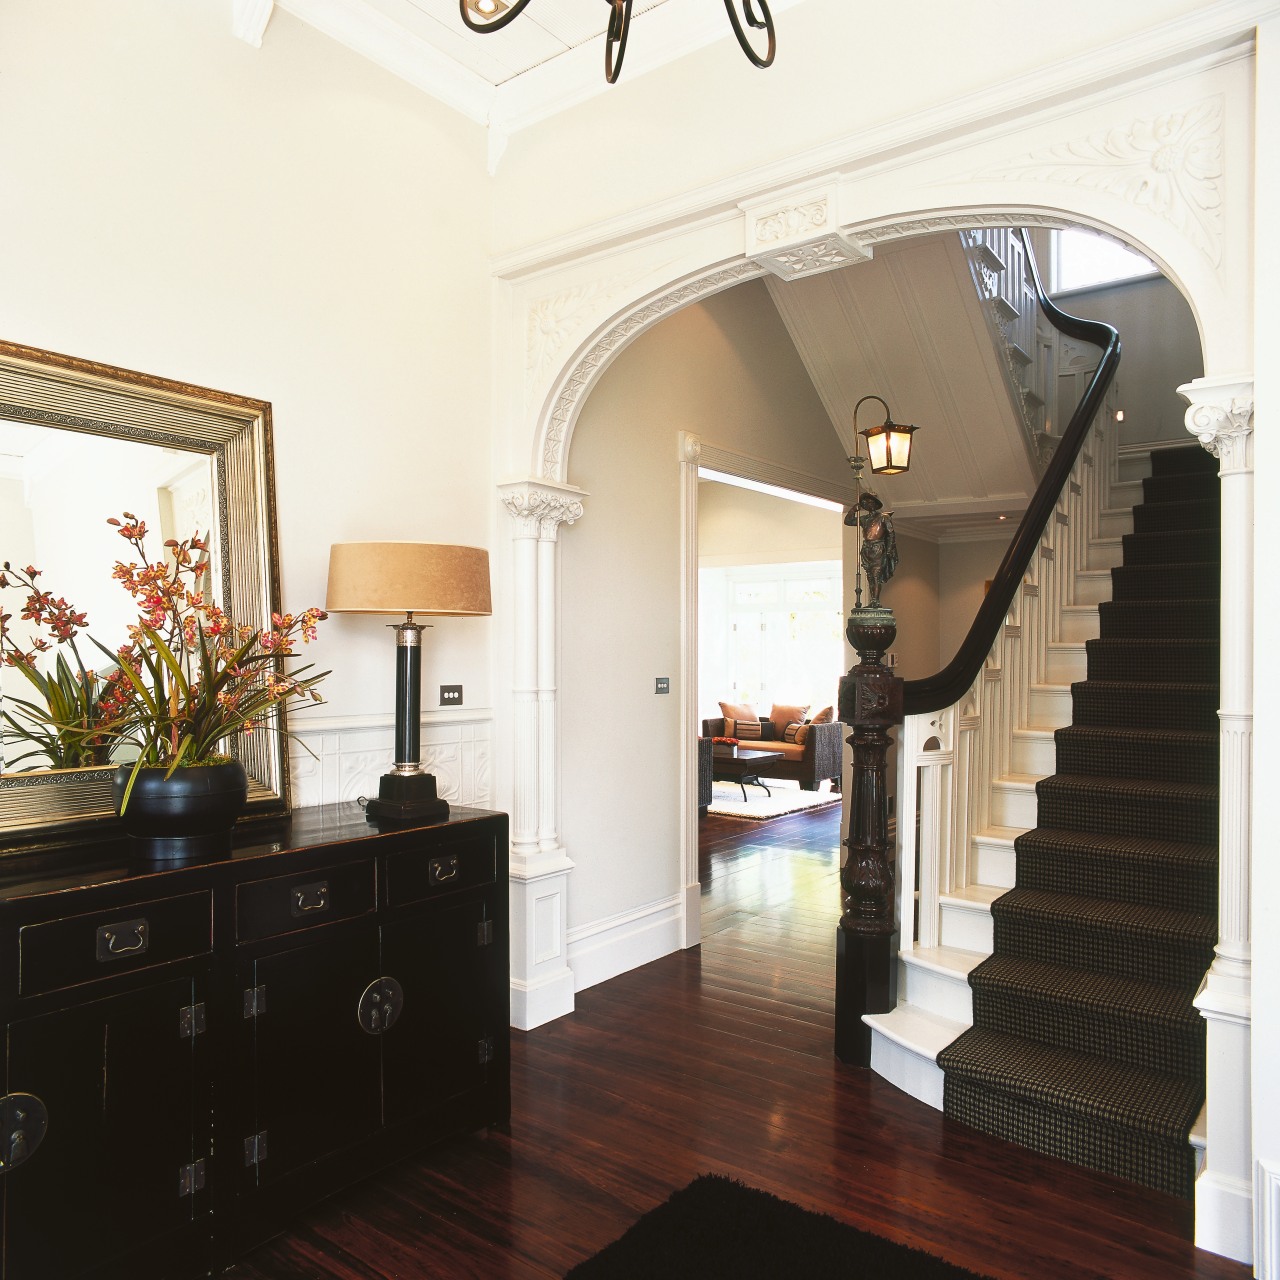 A view of the staircase, wooden flooring, carpeted architecture, ceiling, estate, floor, flooring, hardwood, home, house, interior design, living room, molding, property, real estate, room, stairs, wall, window, white, black